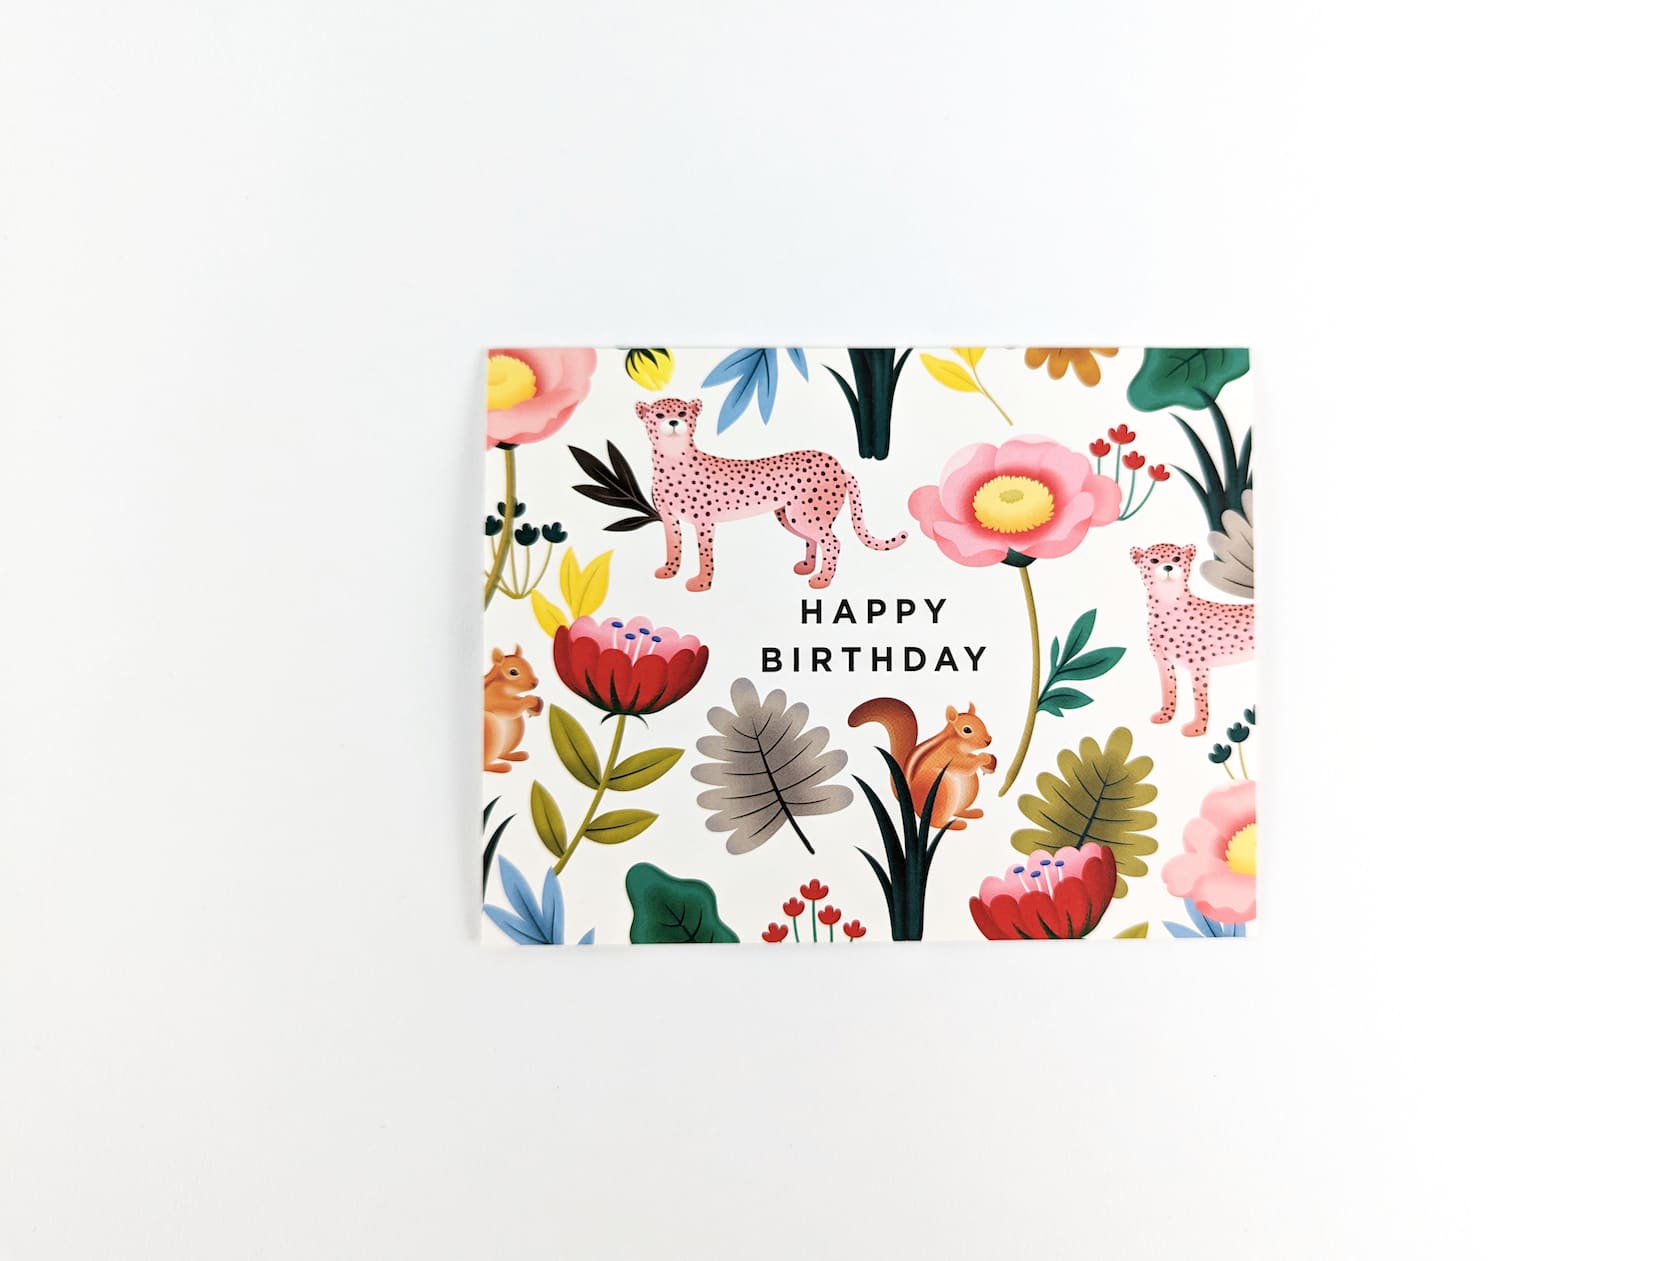 Cream horizontal card with black text in the centre that reads: HAPPY BIRTHDAY. Two cheetahs, two squirrels and a variety multi-coloured flowers and leafs are featured around the text.